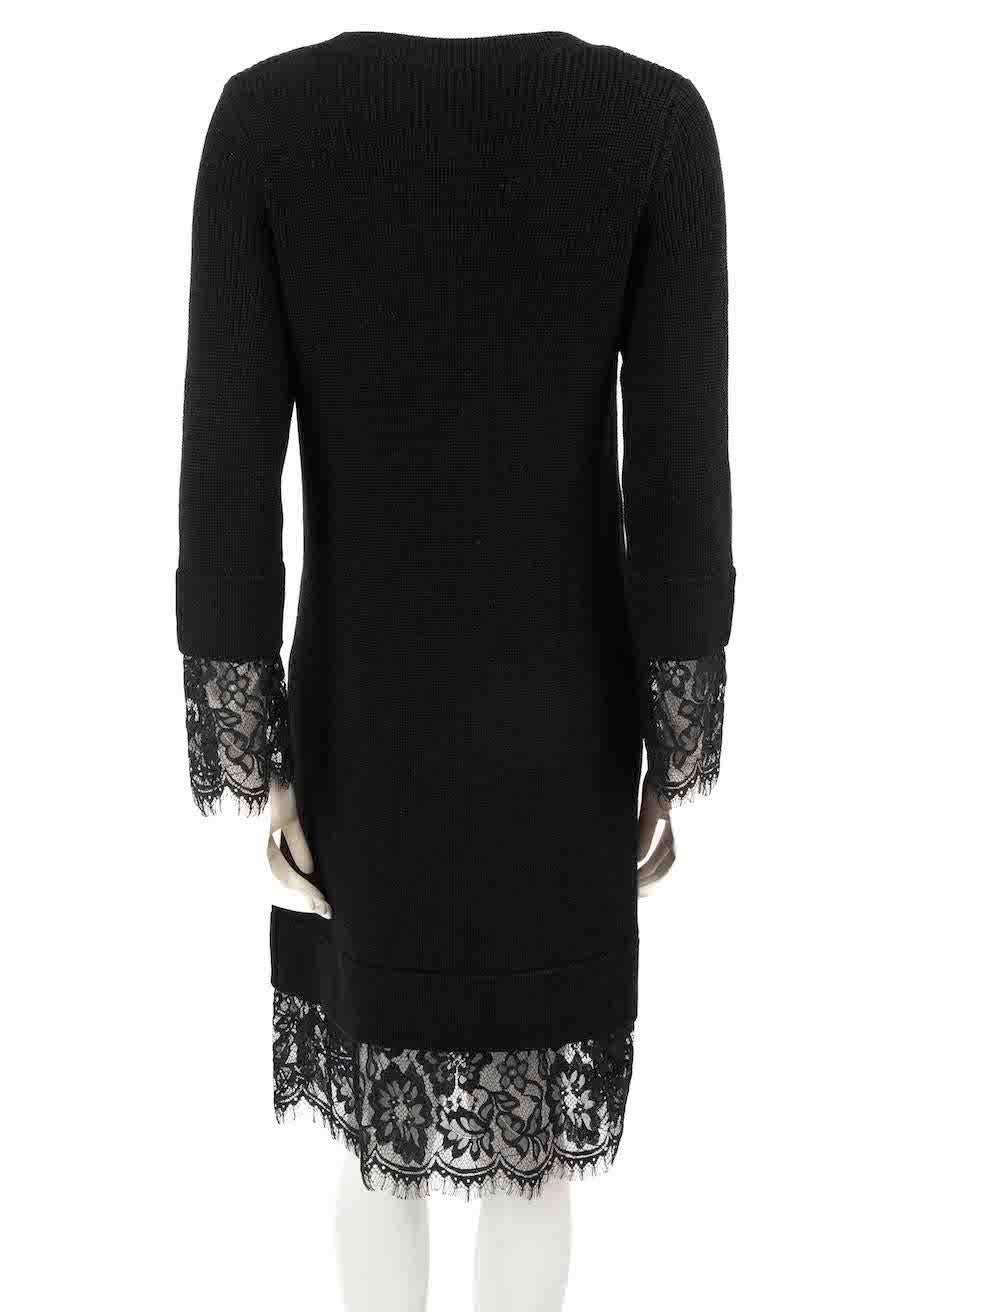 Moschino Love Moschino Black Wool Lace Trim Jumper Dress Size S In New Condition For Sale In London, GB